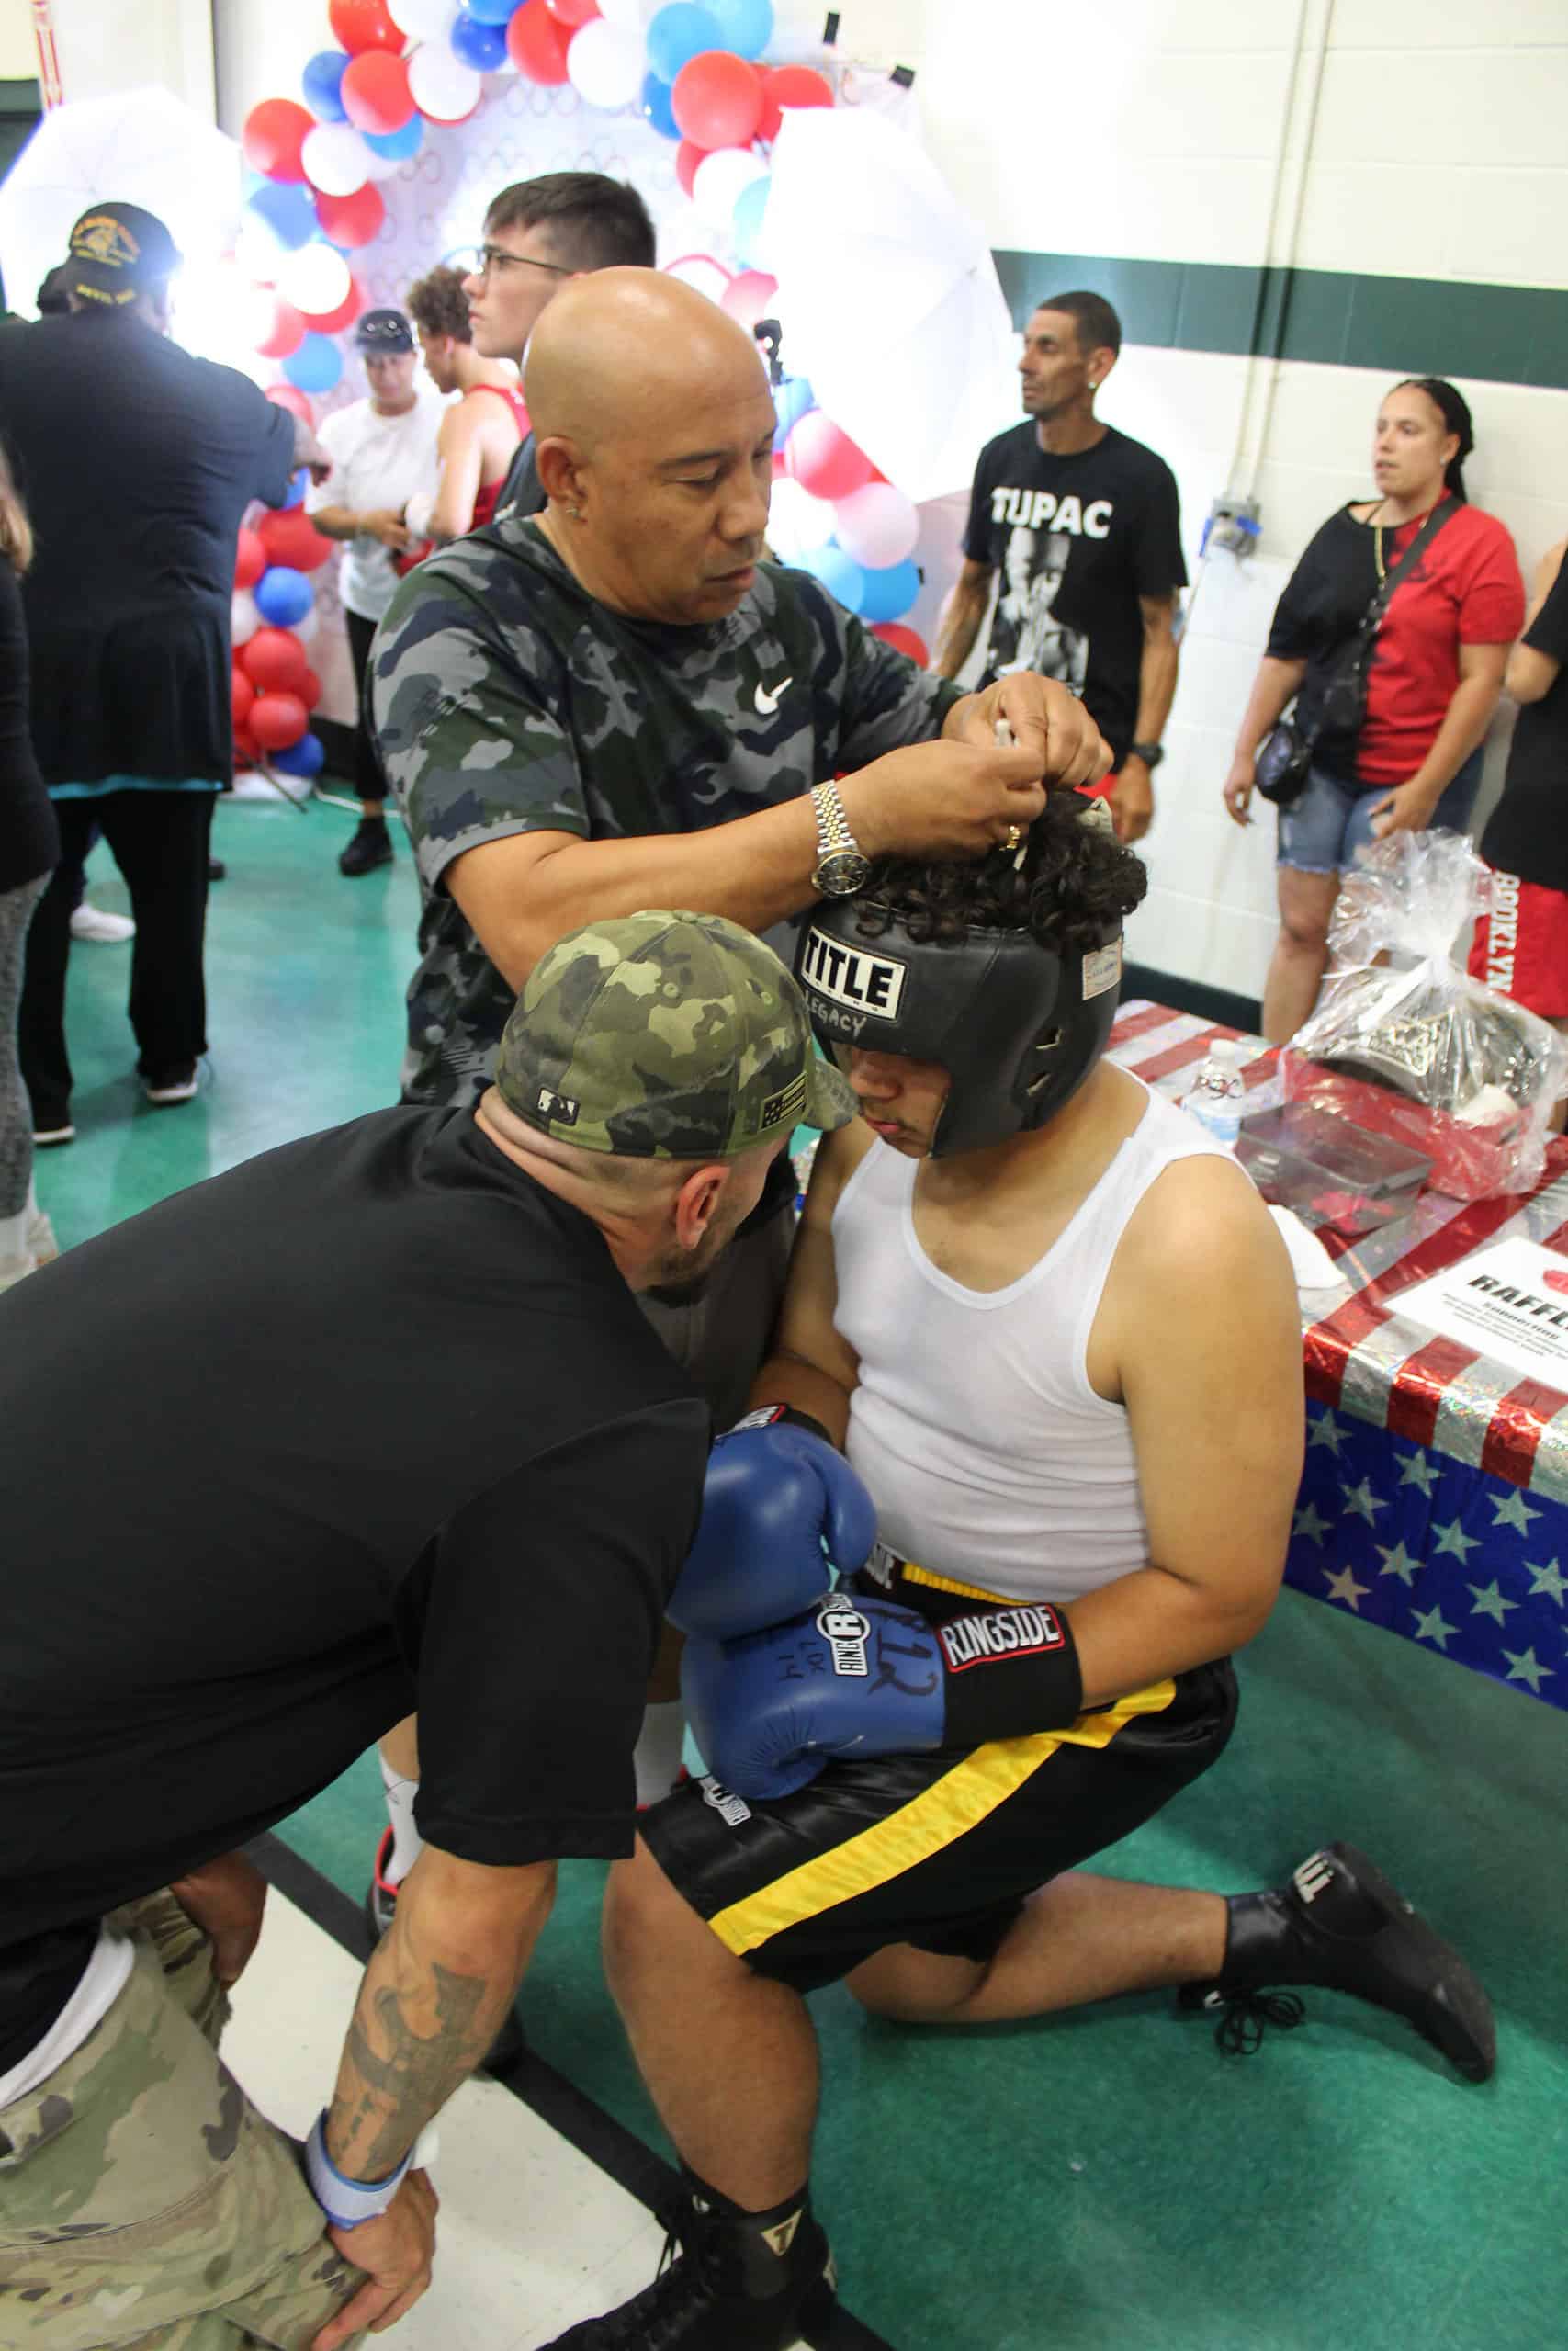 Coach Mendoza (left) and Coach Bruce (middle) of Team Wolfpack Boxing prepare Sebastian Cancel (right) for his bout on Sunday.